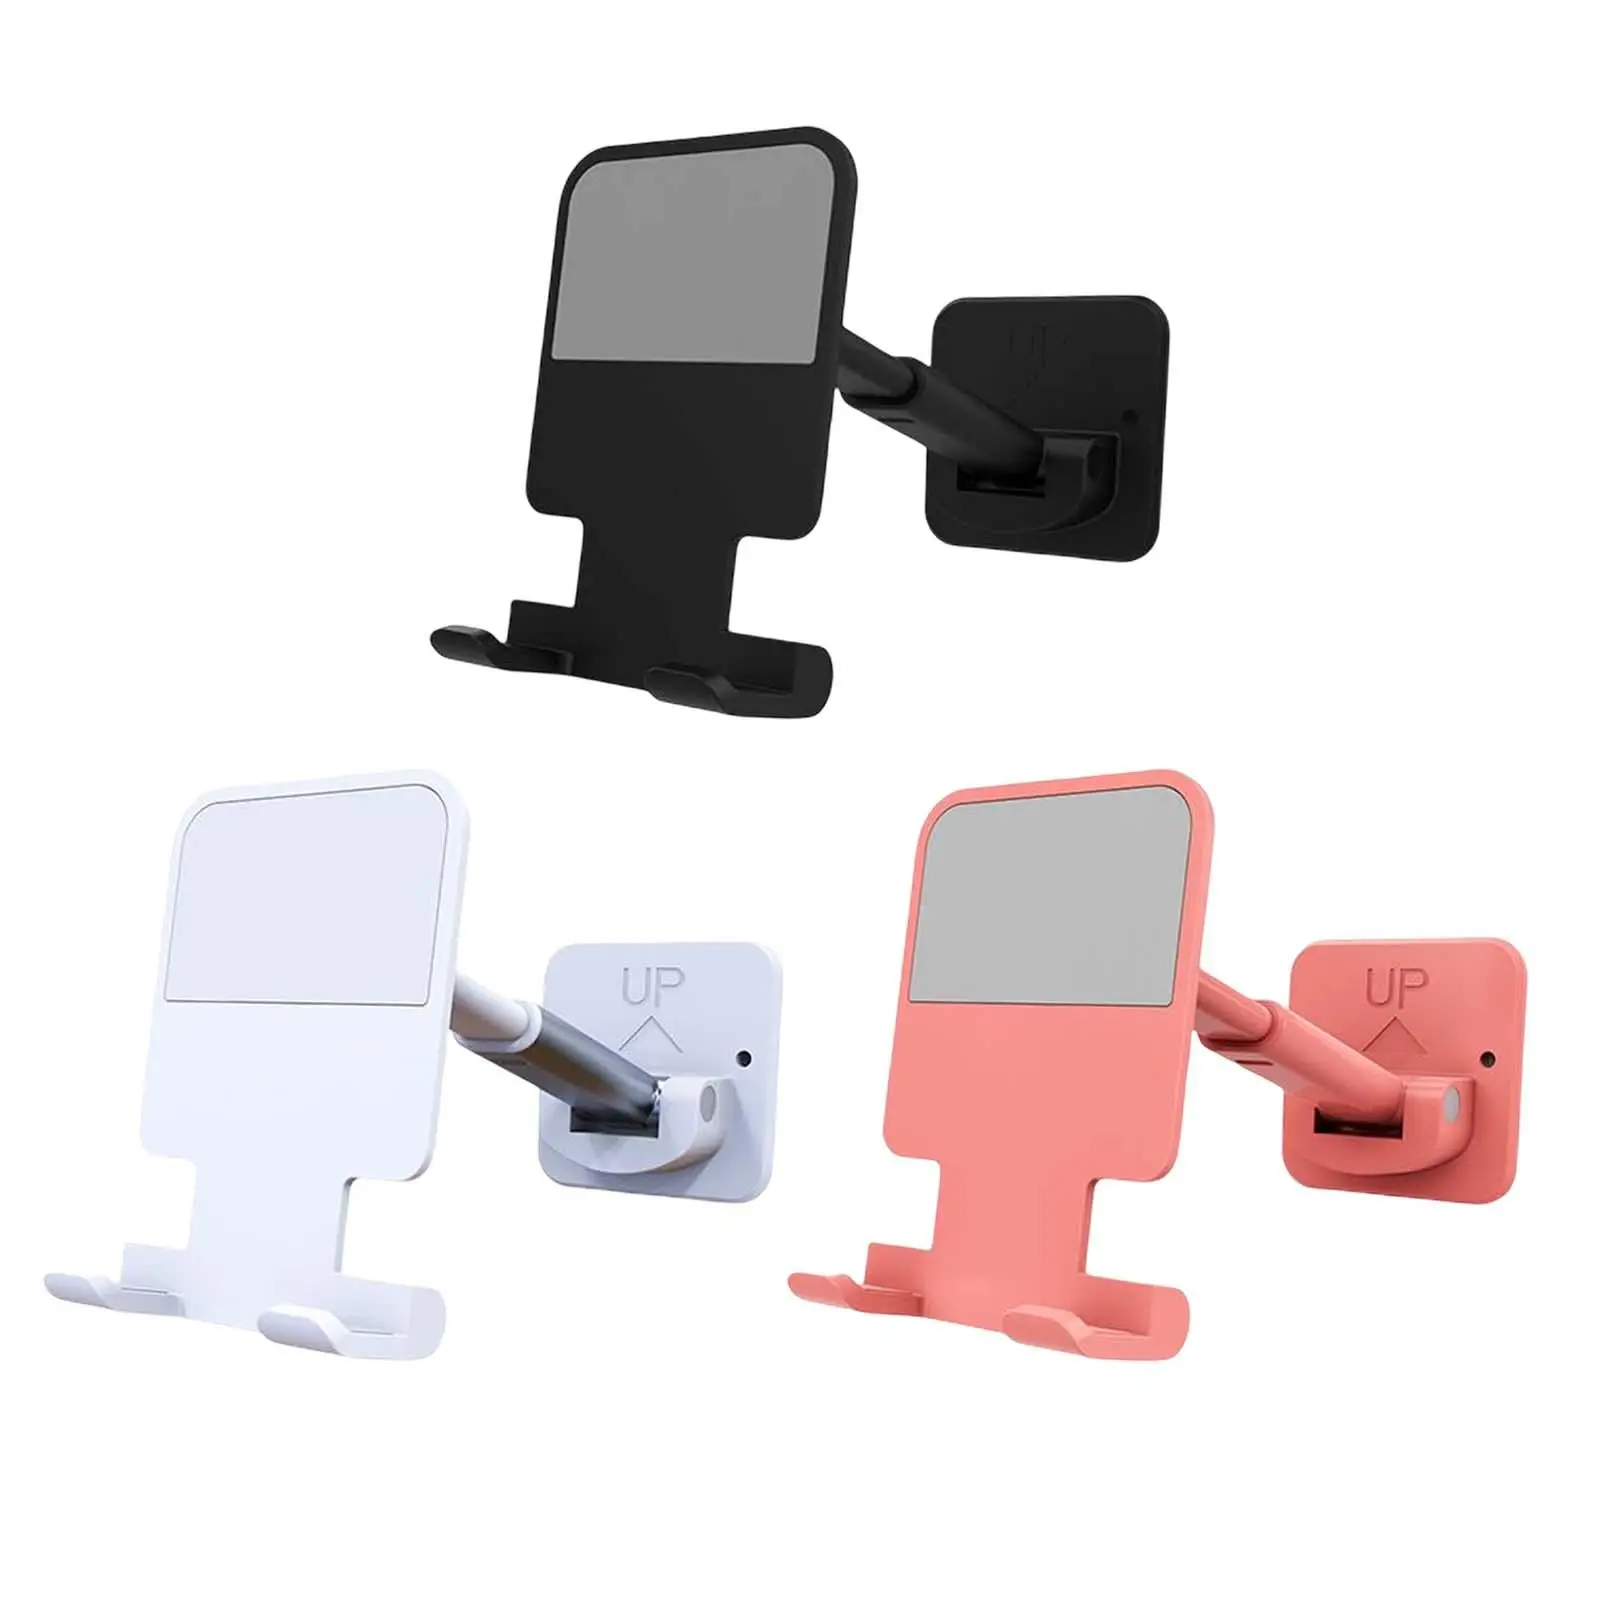 Adhesive Phone Holder Angle Adjustable Cellphone Mounted Phone Mount Bracket for Wall Kitchen Bedroom Bathroom Window